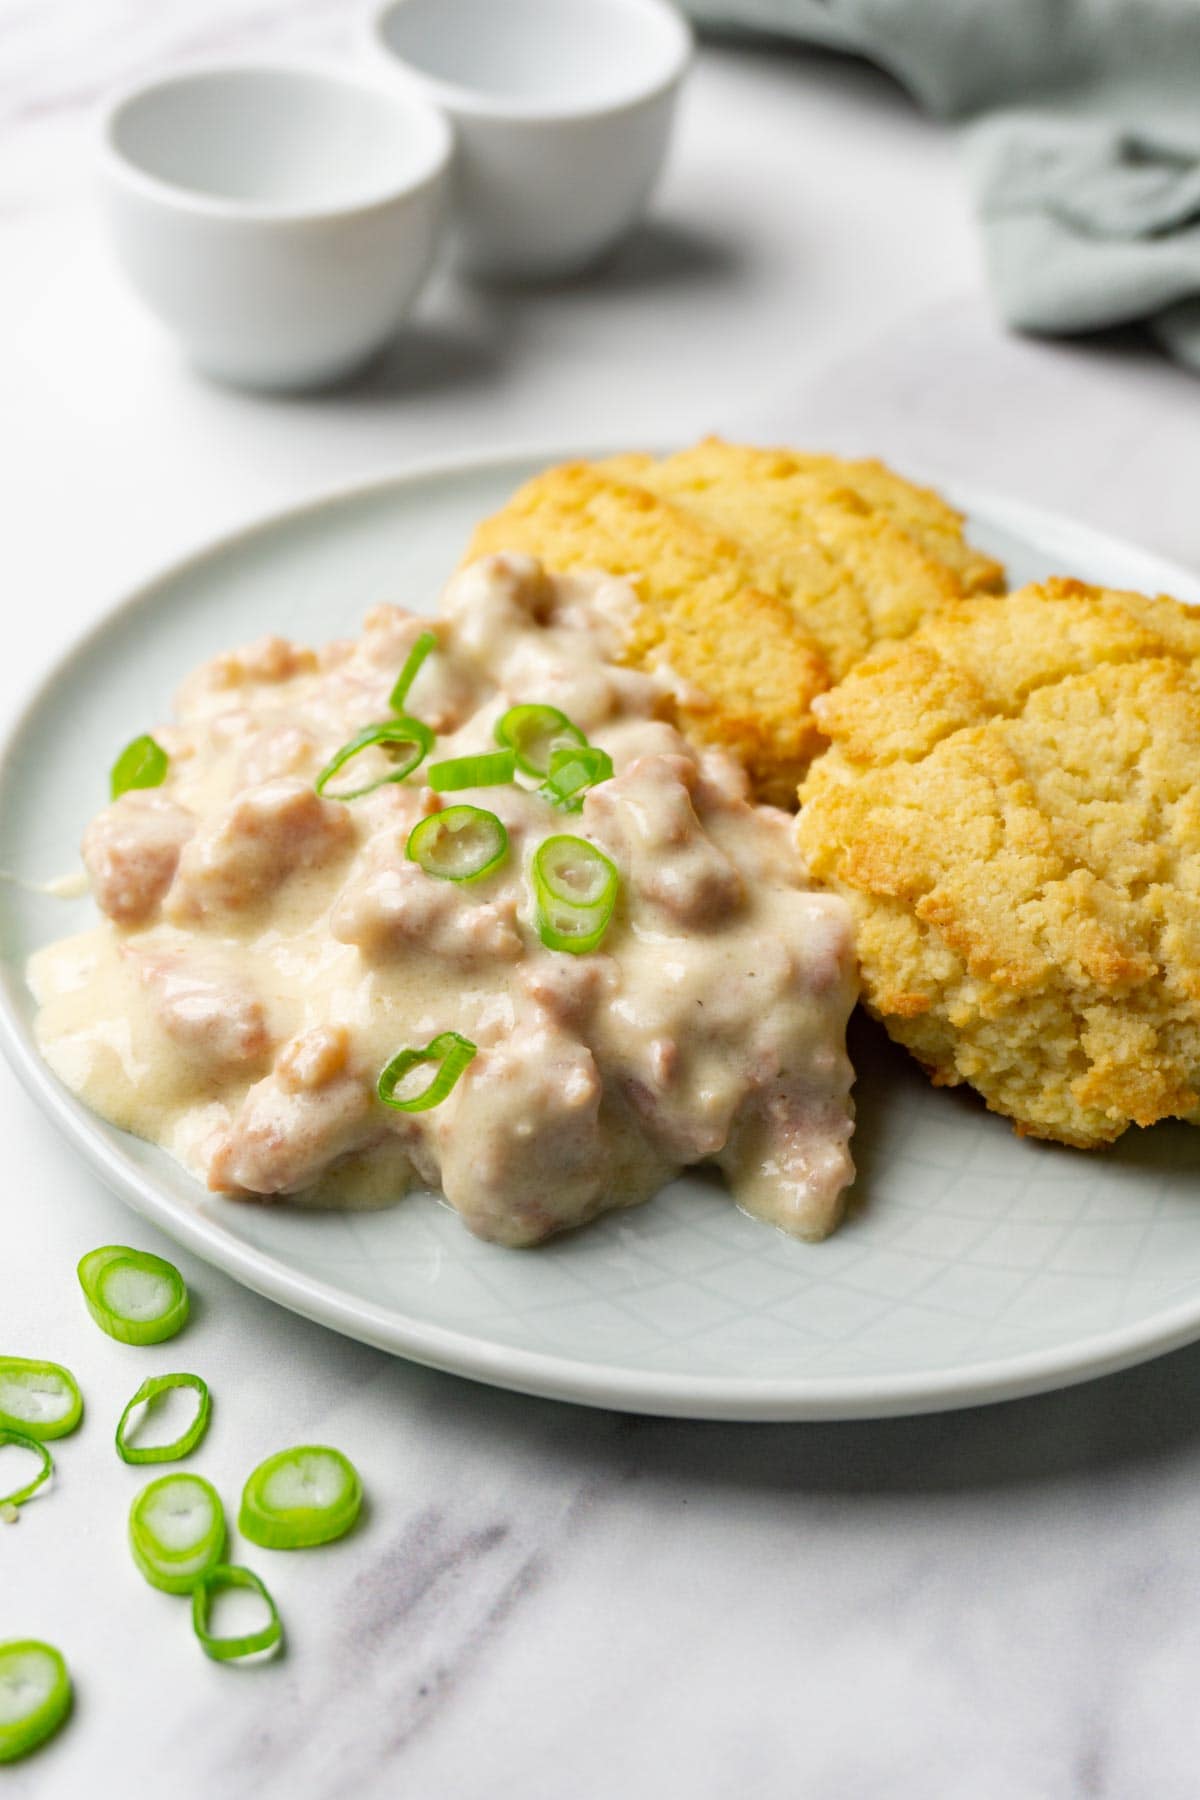 Asmall plate with biscuits and sausage gravy garnished with chopped green onion.